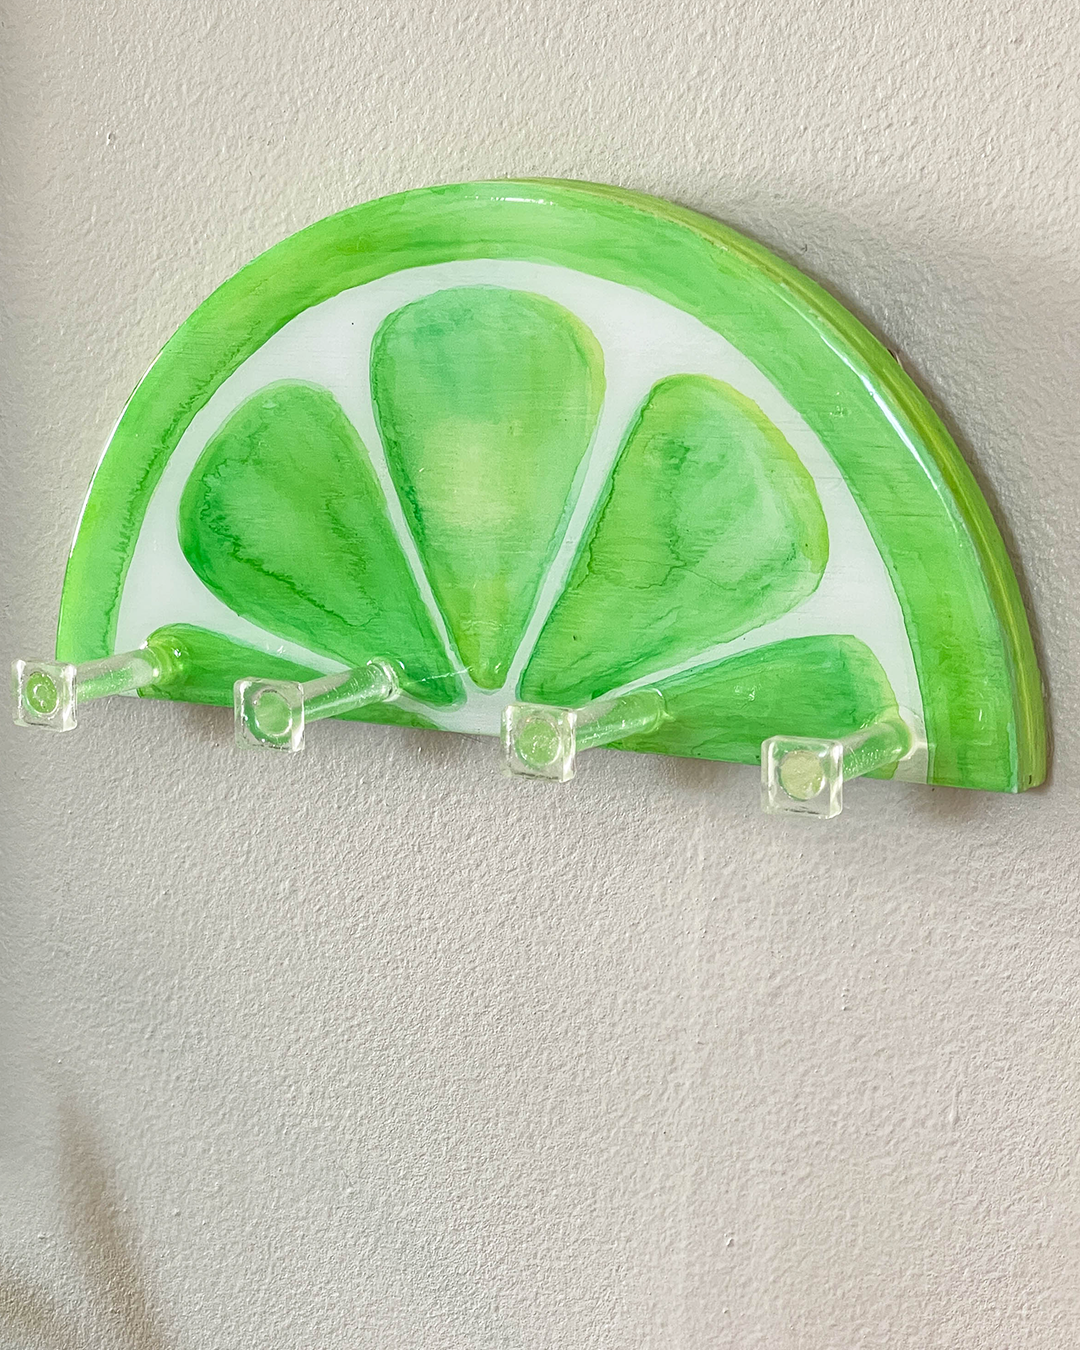 Patent-pending lime slice design key holder, showcasing its lightweight structure and unique, eye-catching appearance